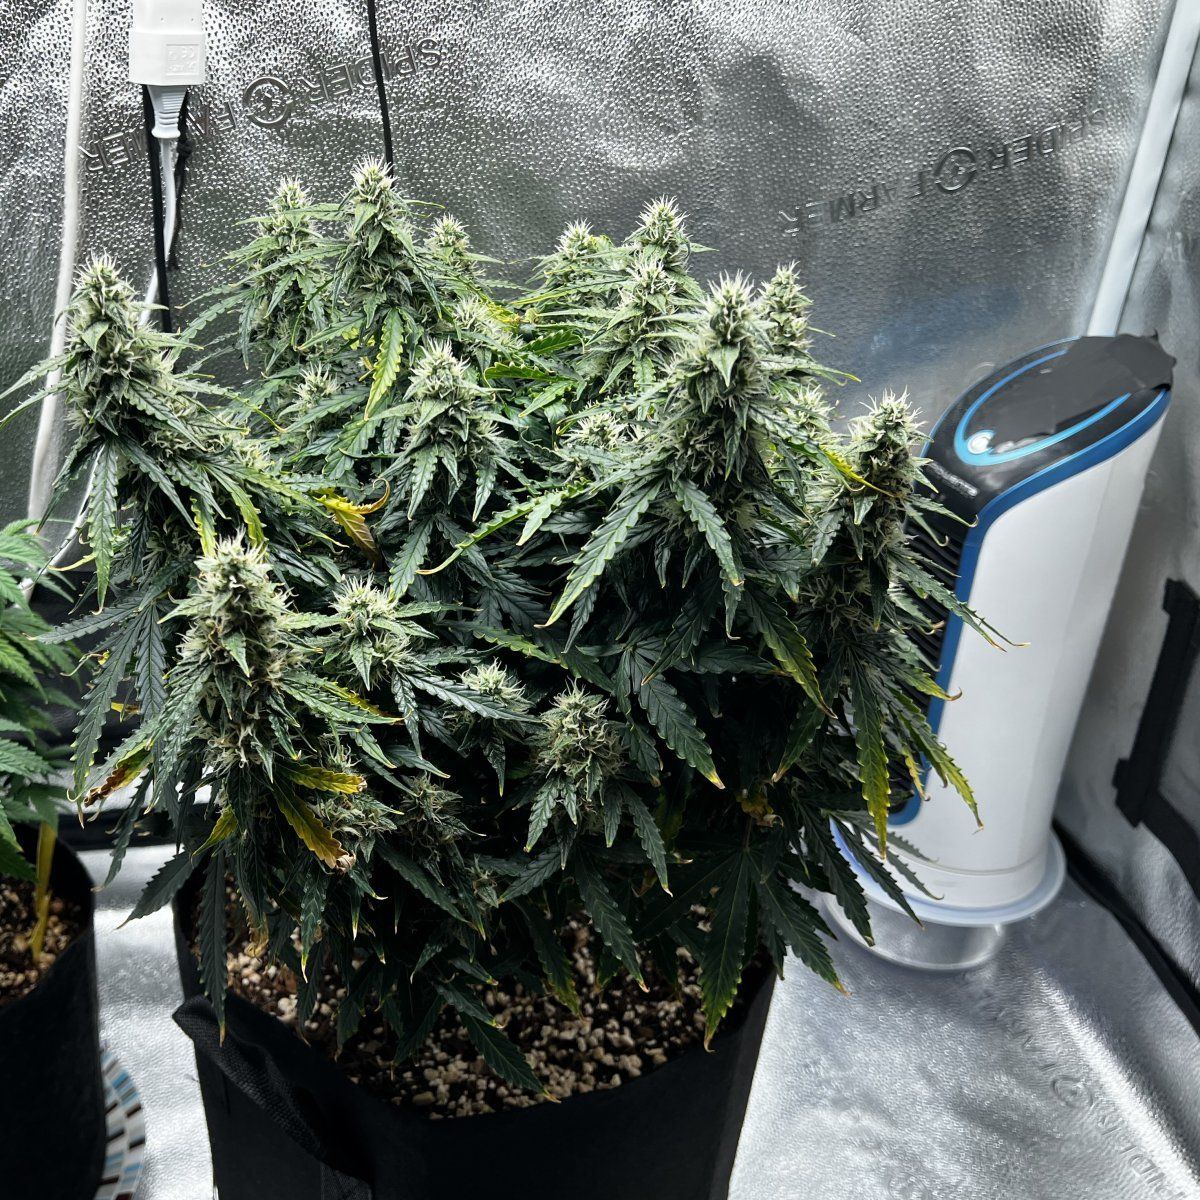 Please help me save this plant and finish my first ever grow 4